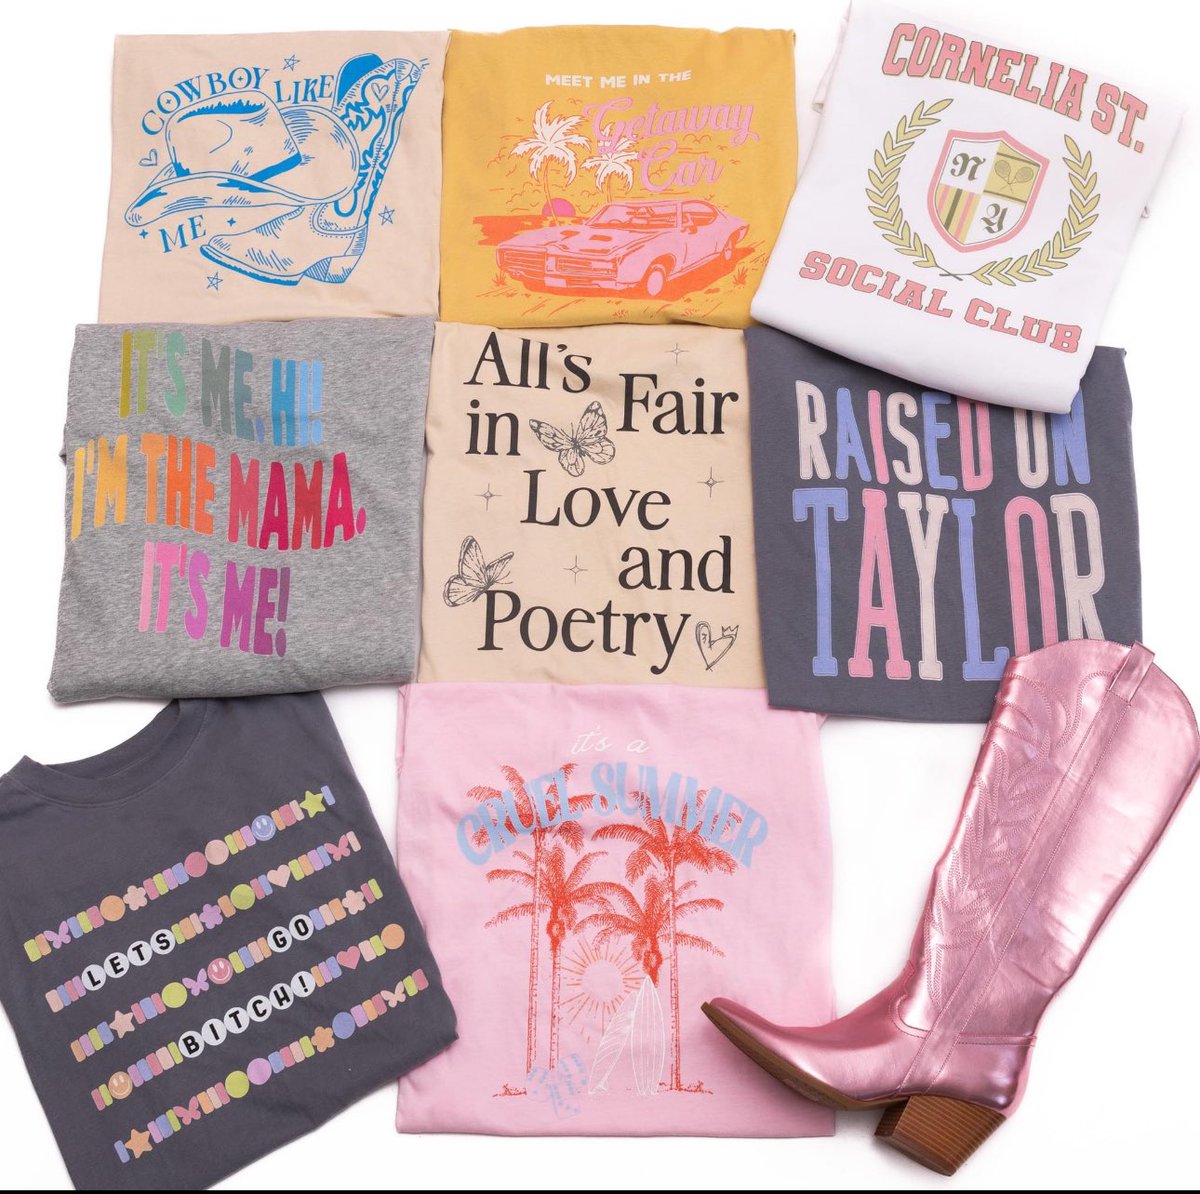 Pink Lily has some cute Taylor Swift Graphic Tees right now. Use my link pinklily.sjv.io/gbz5r0 and code April20 for 20% off. #pinklily #pinklilyambassador #raisedontaylor #graphictees